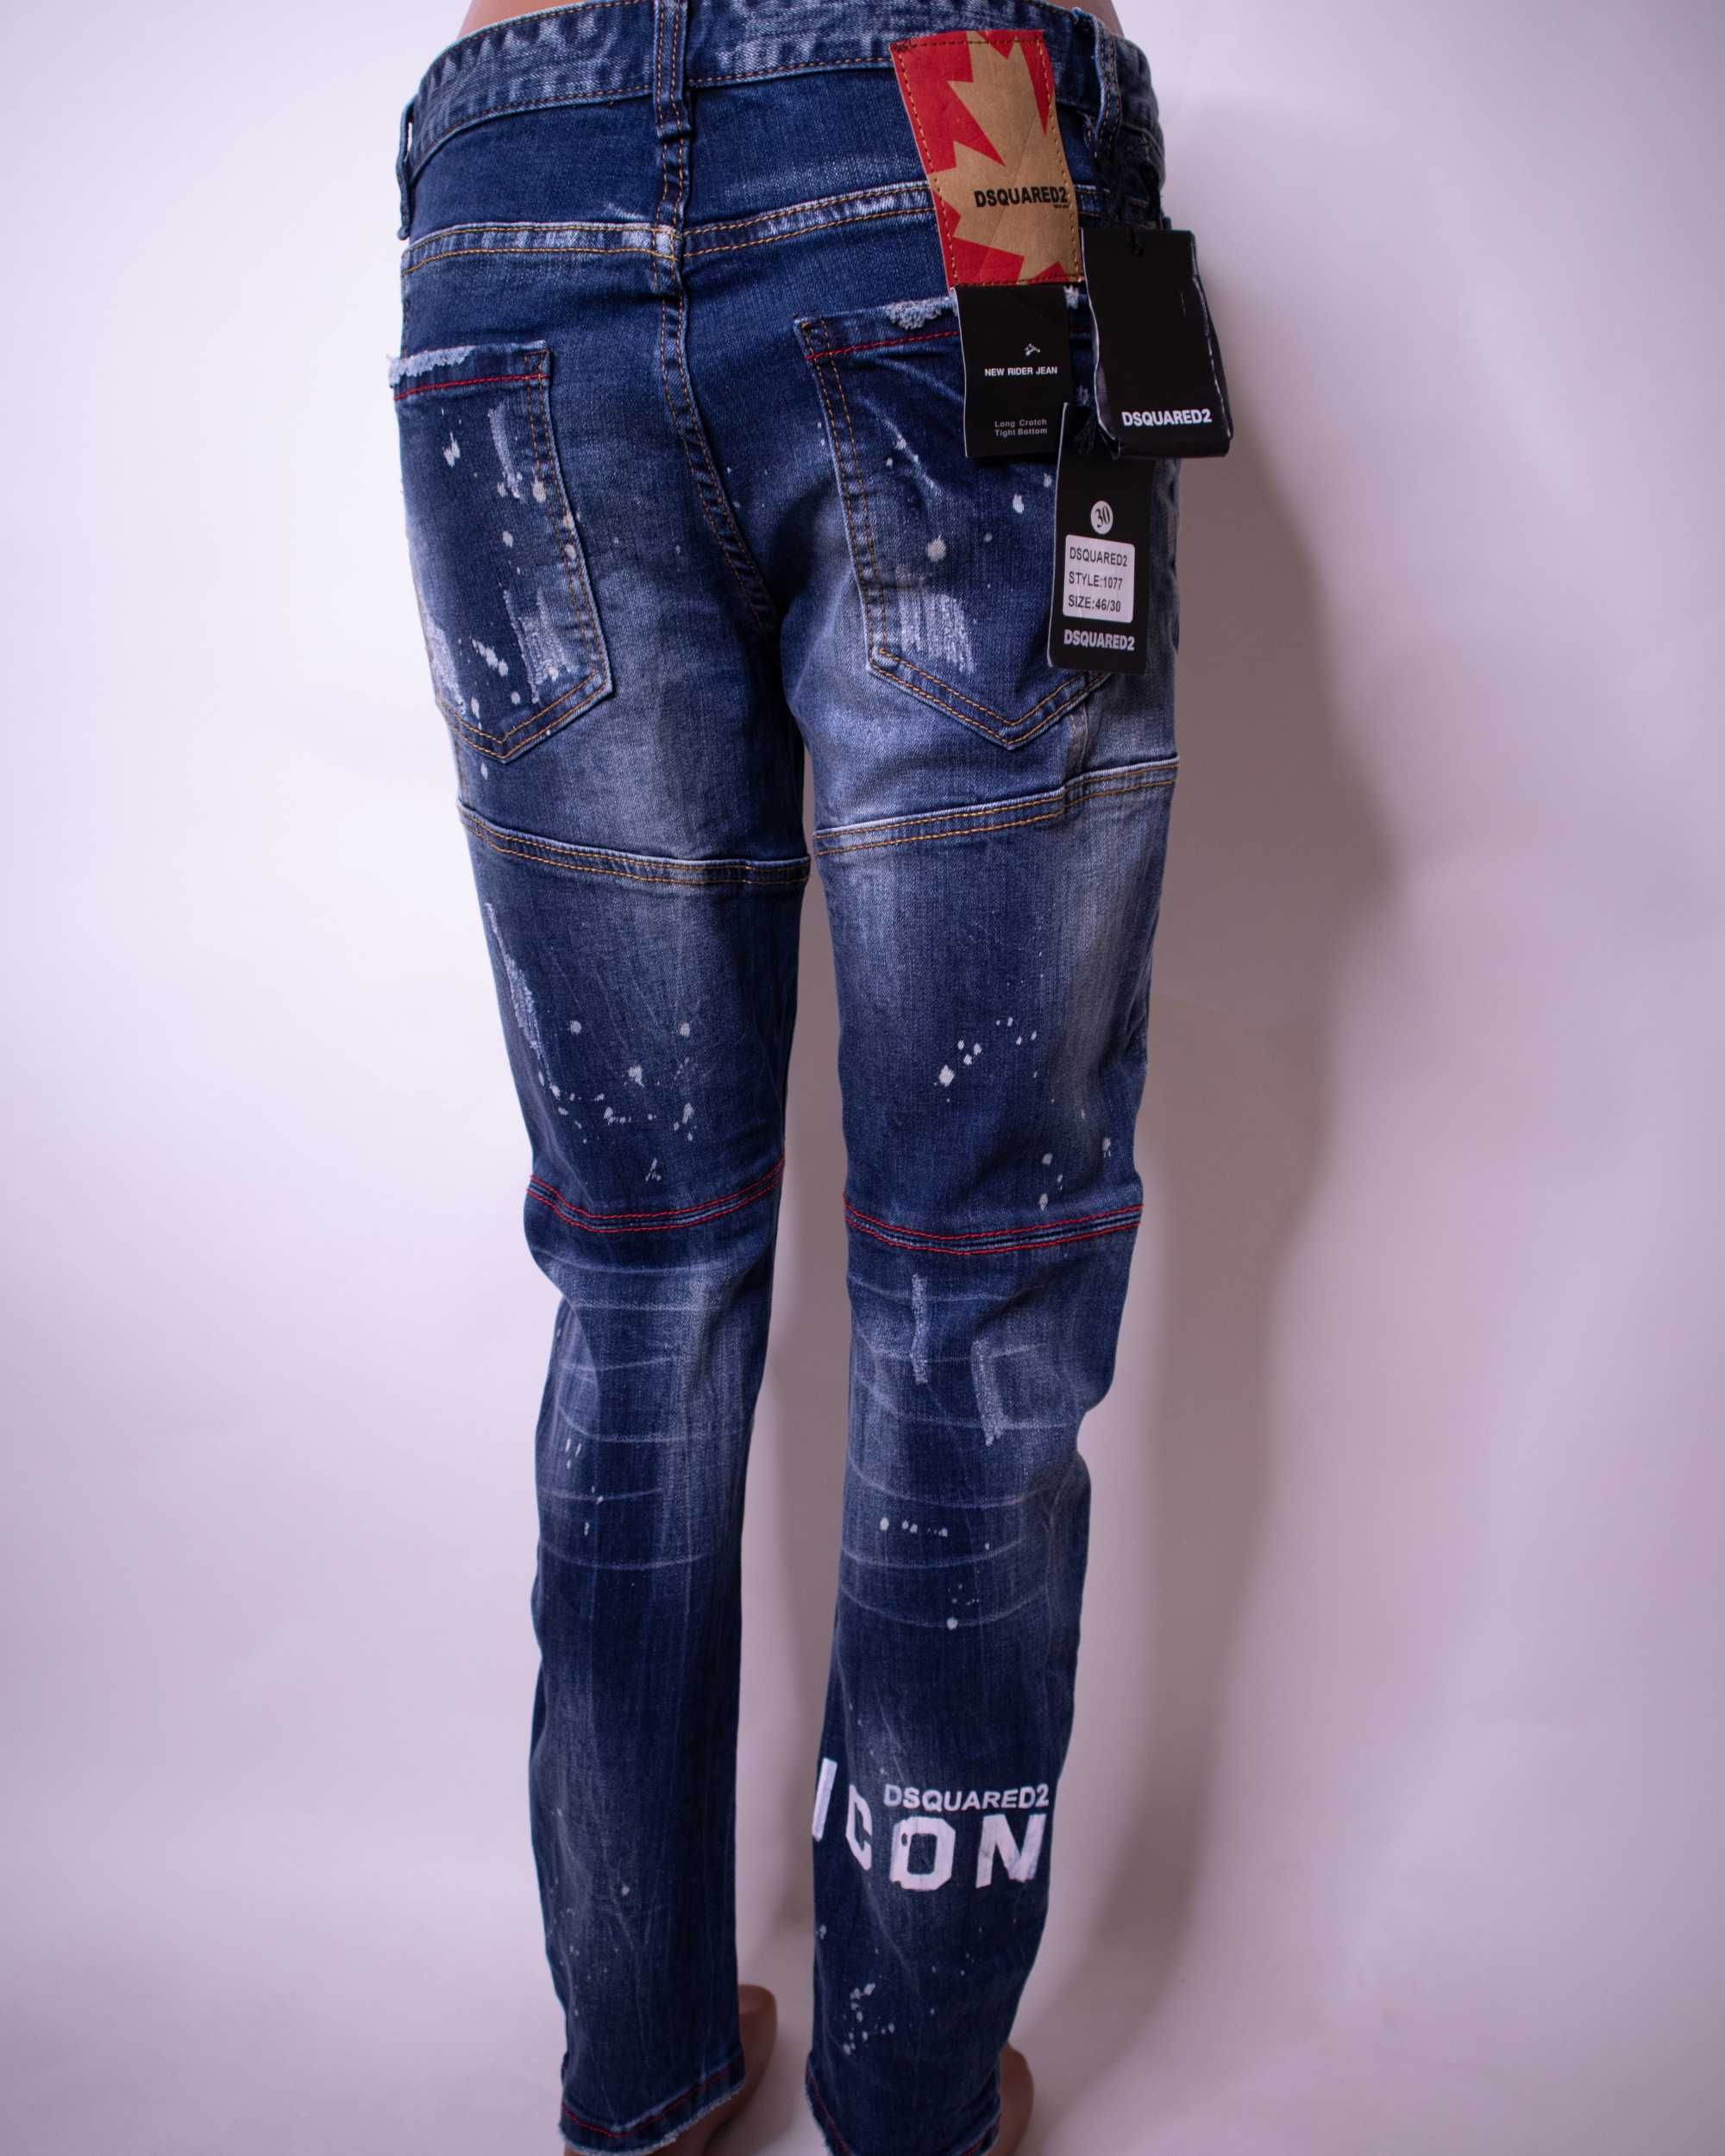 Blugi |- DSQUARED2 -| Denim Collection -|- Club -|- ICON -|- Painted